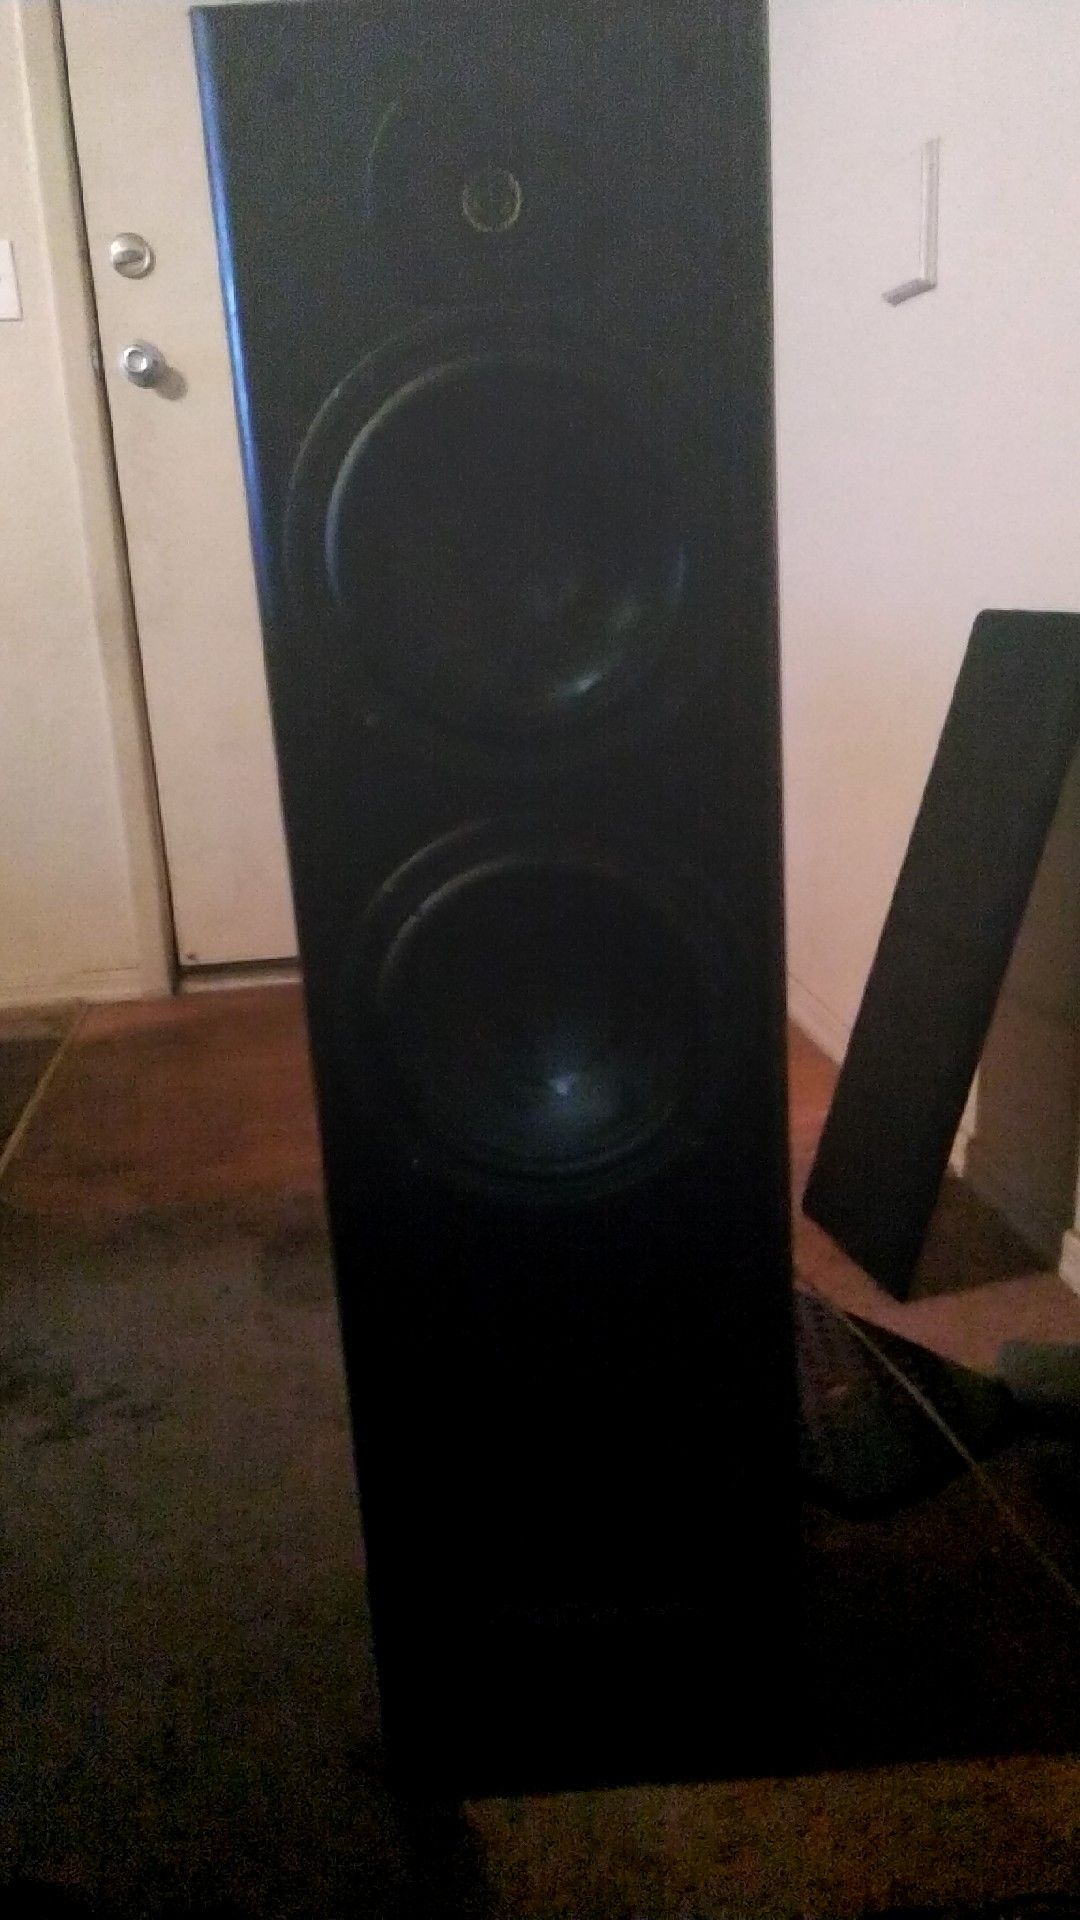 2 tower speakers (digital pro audio) with RCA receiver 400watts!!